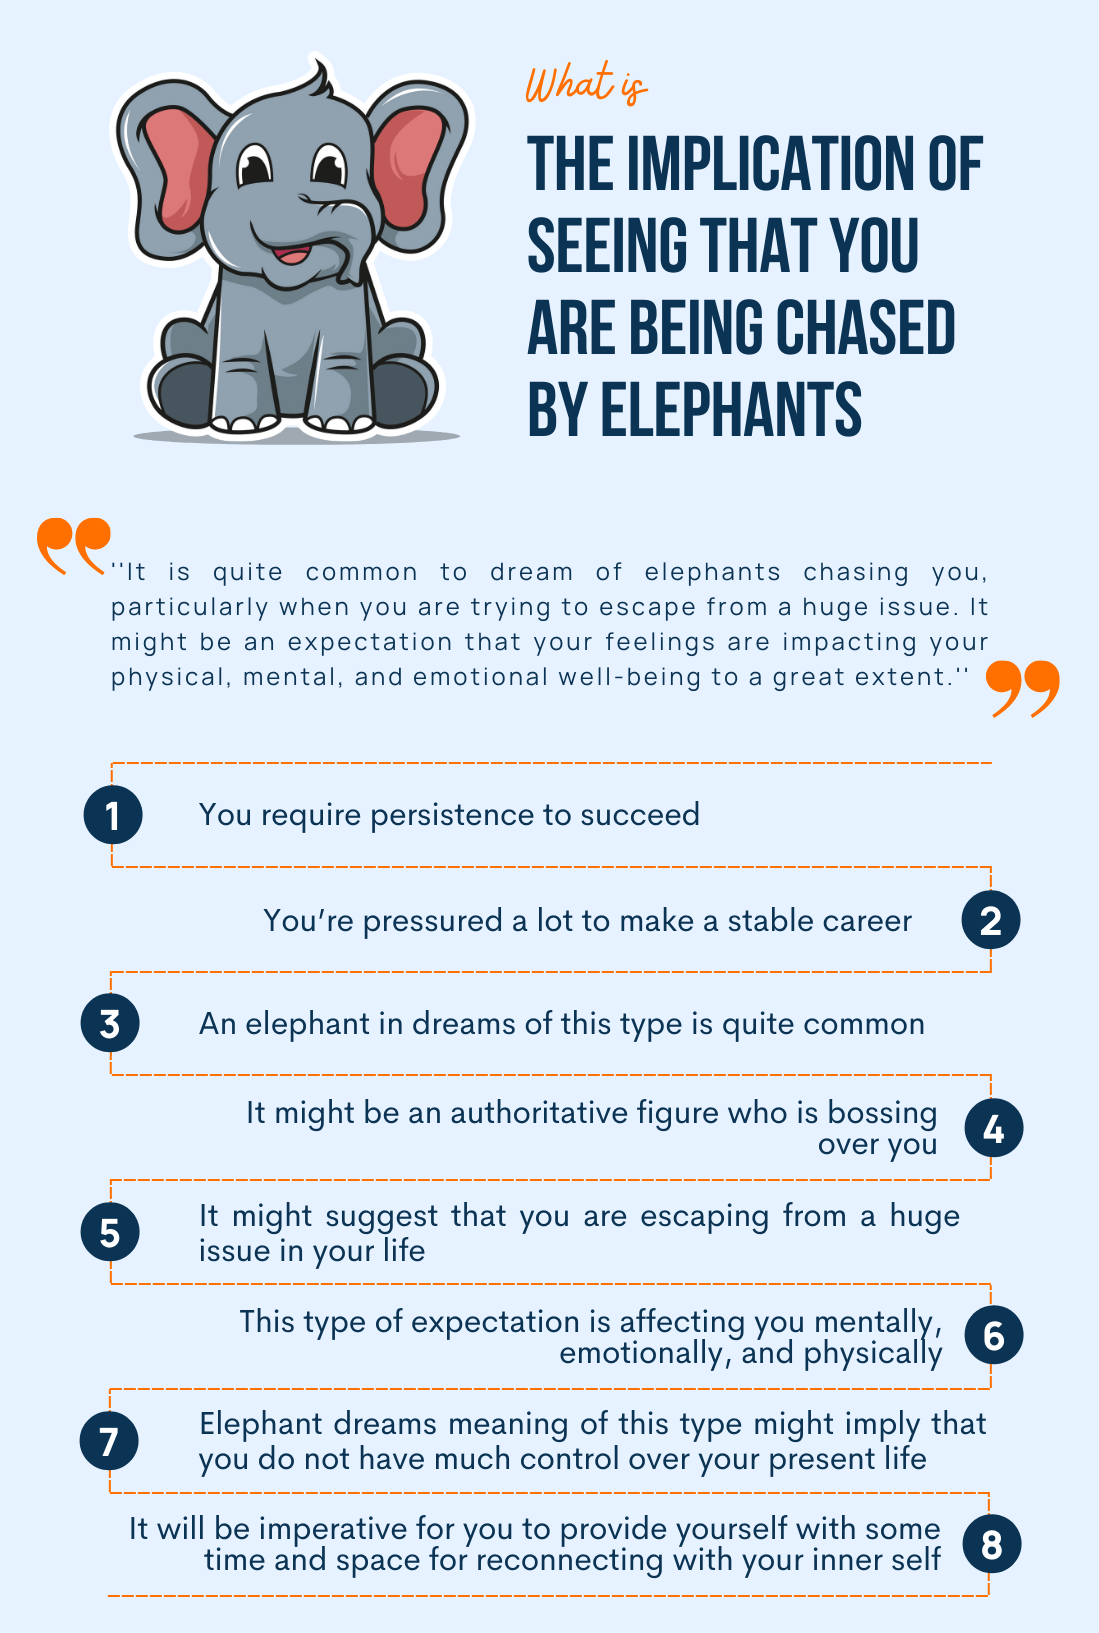 What is the Implication of Seeing That You are Being Chased by Elephants